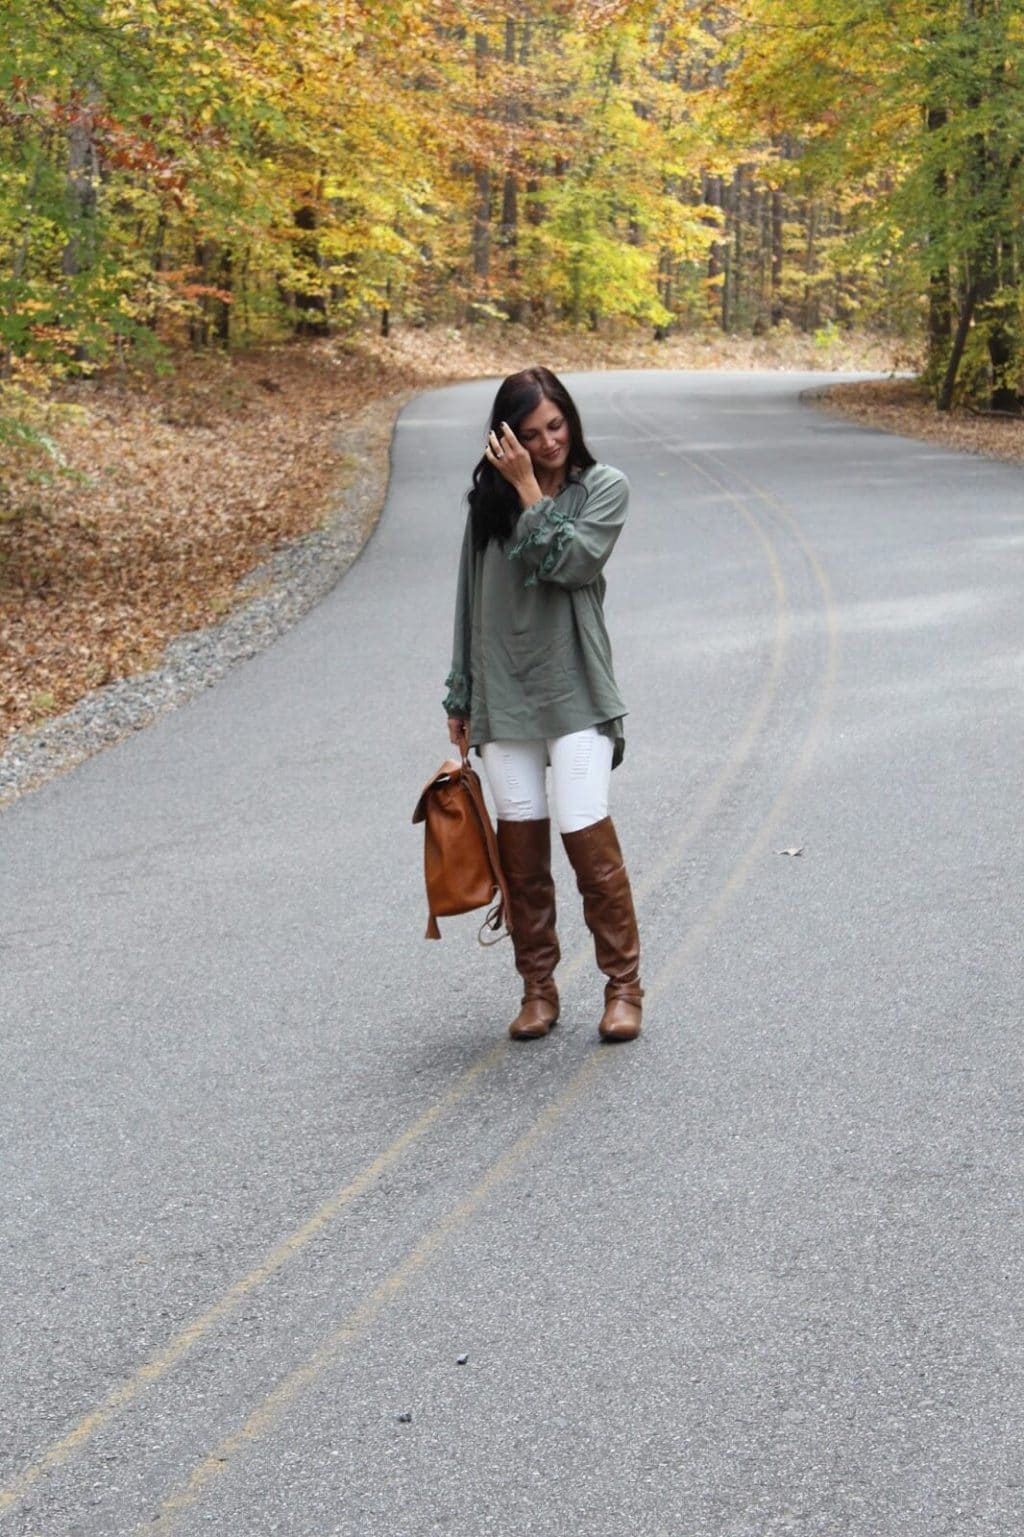 Tassel Blouse, White Jeans for Fall, Cognac Riding Boots